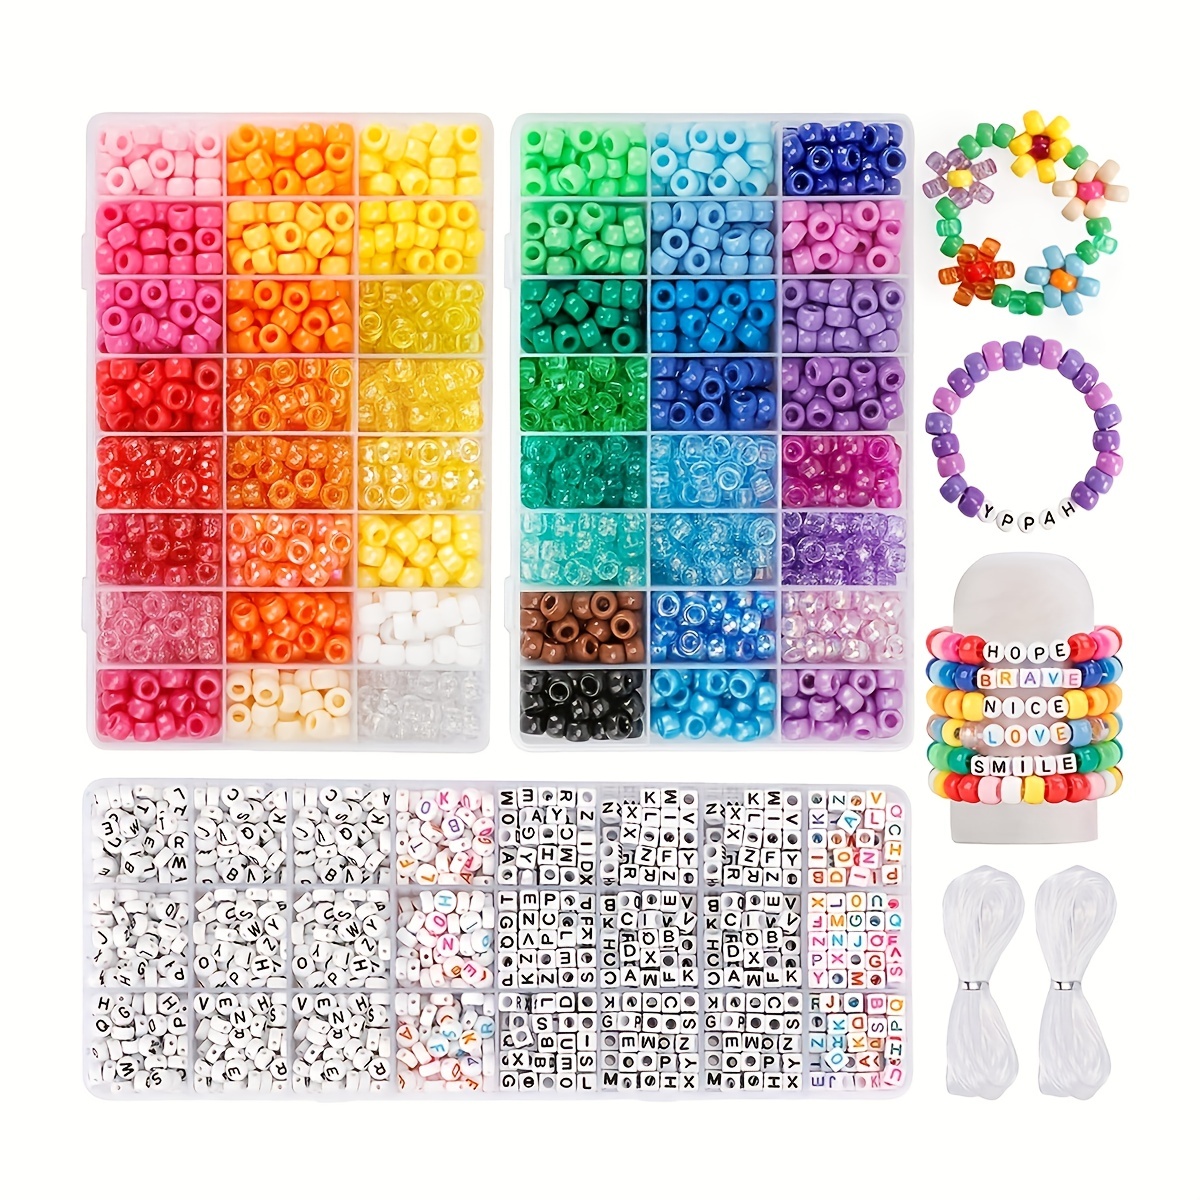 Bead Bracelet Making Kit, Bead Friendship Bracelets Kit with Pony Beads Letter Beads Charm Beads and Elastic String, Women's, Size: One size, Other